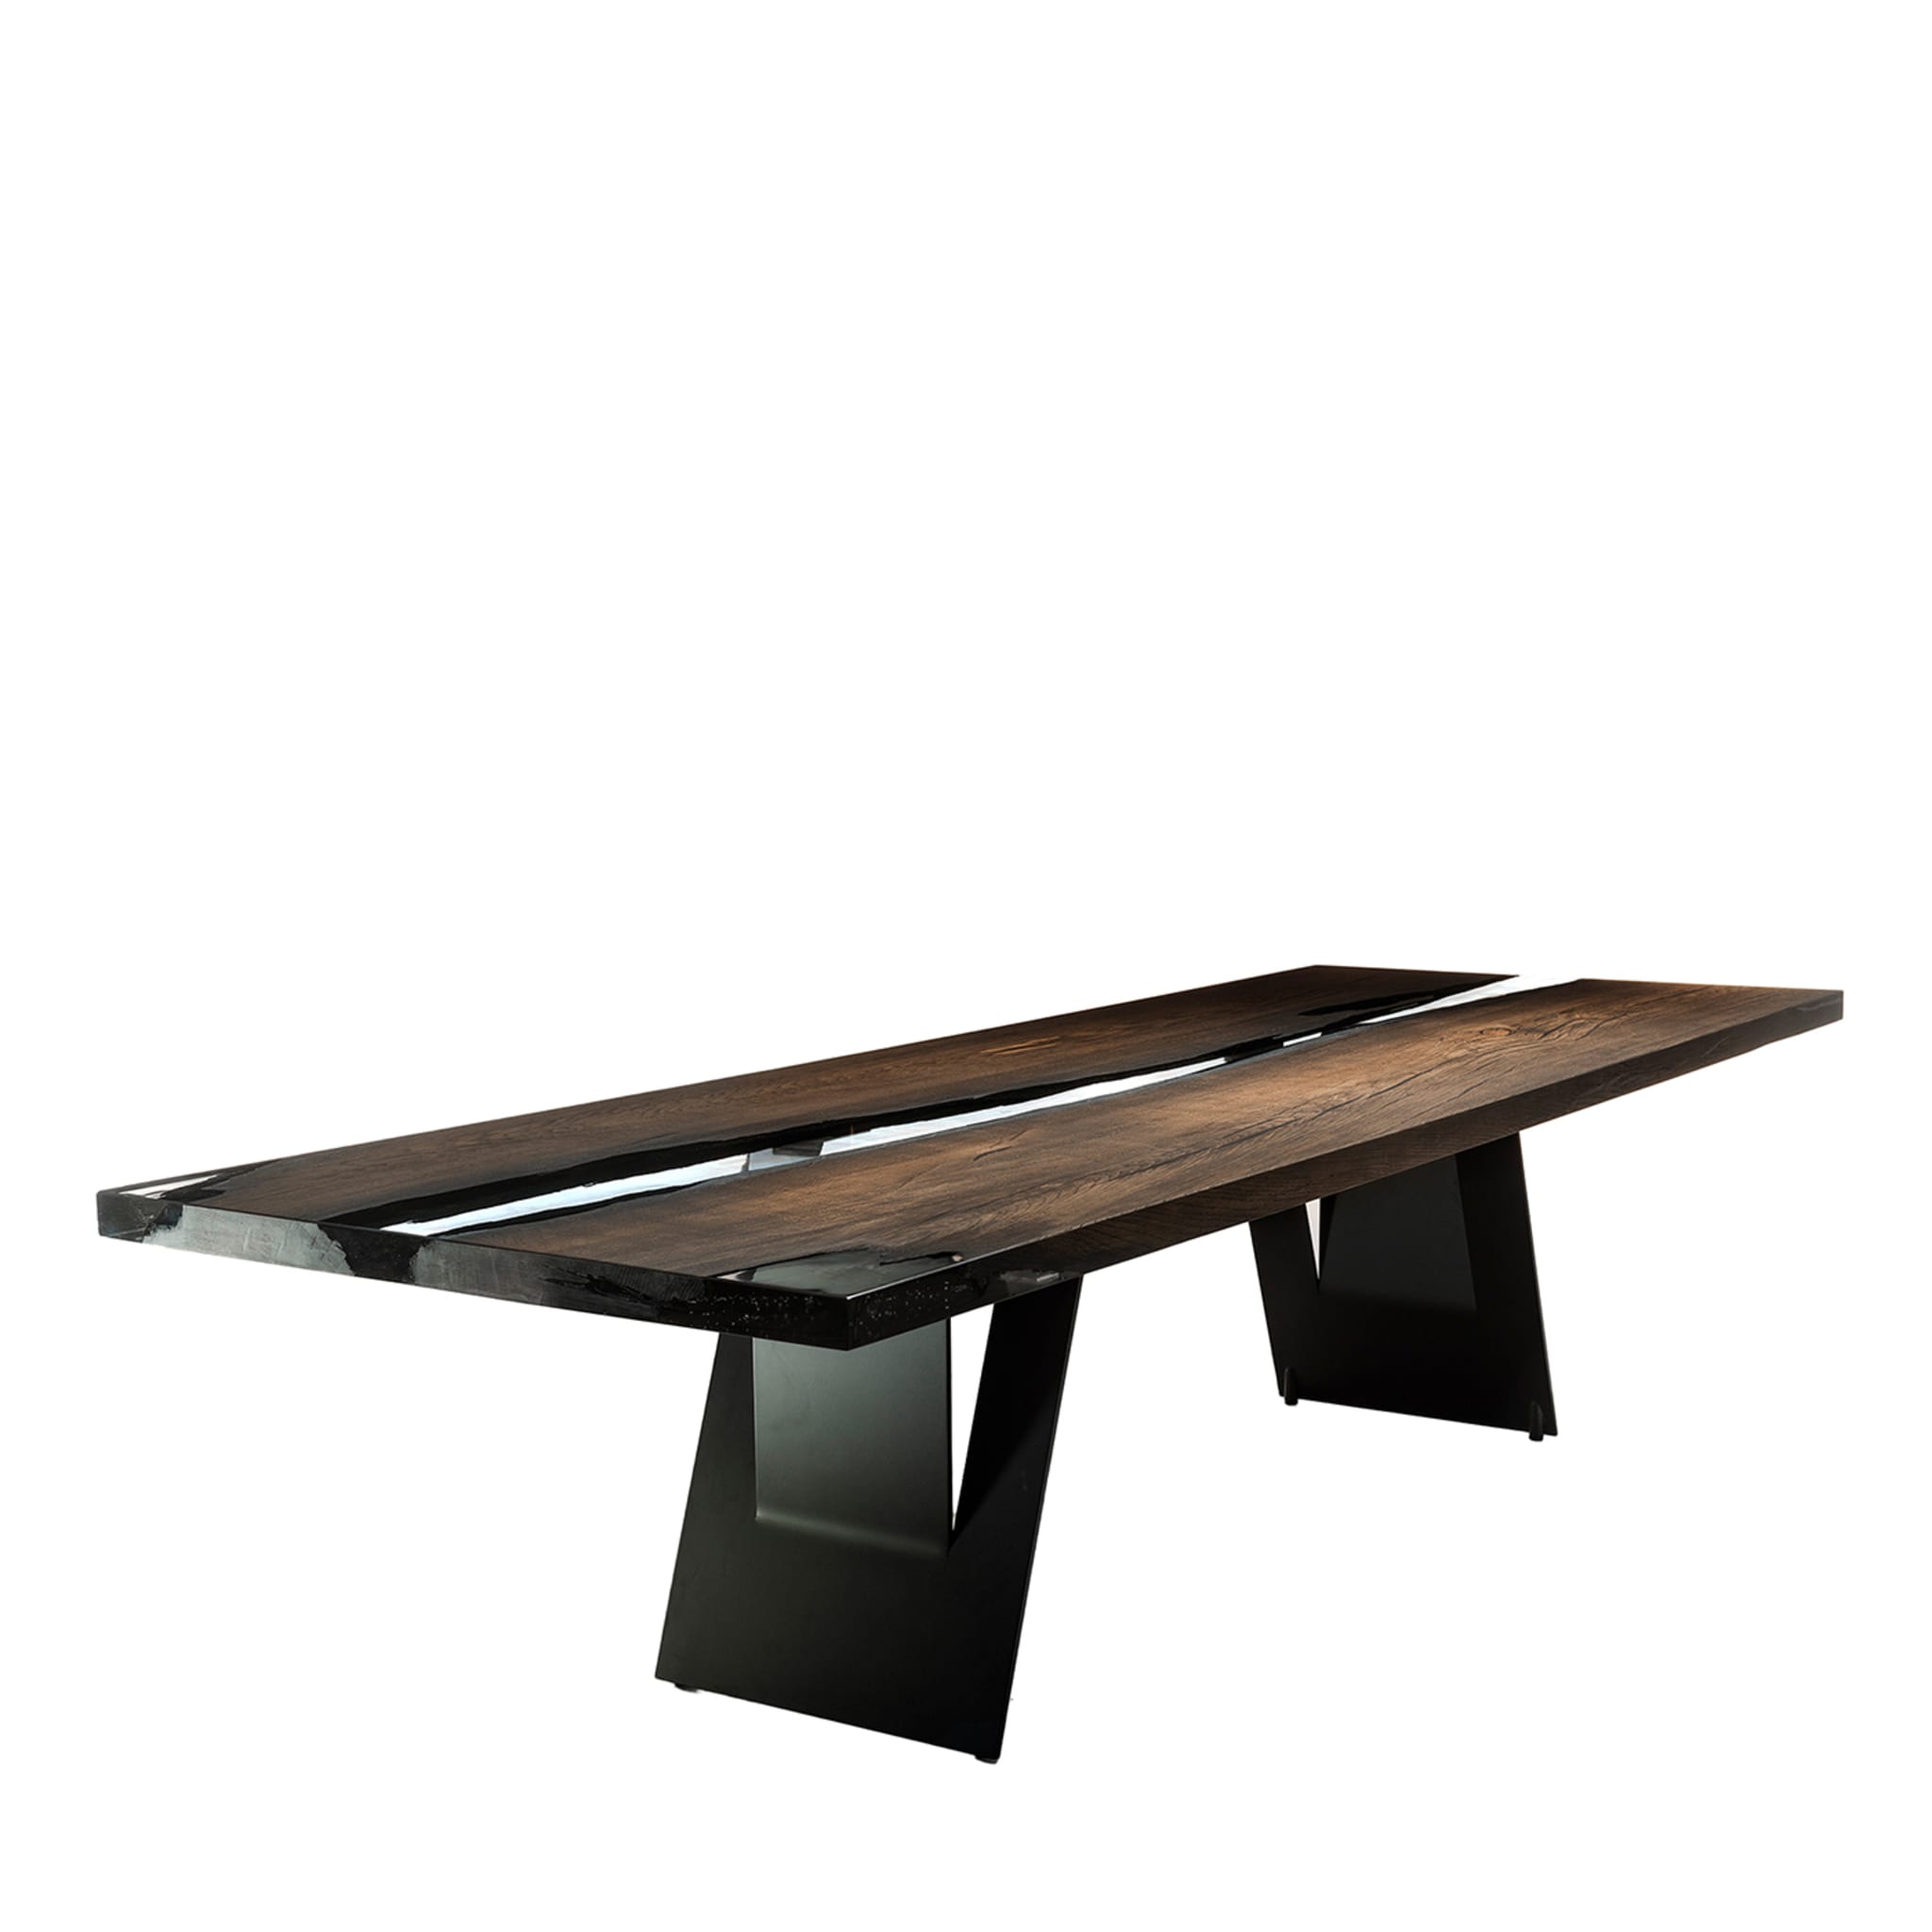 Parmenide Fossil Oak Dining Table - Main view